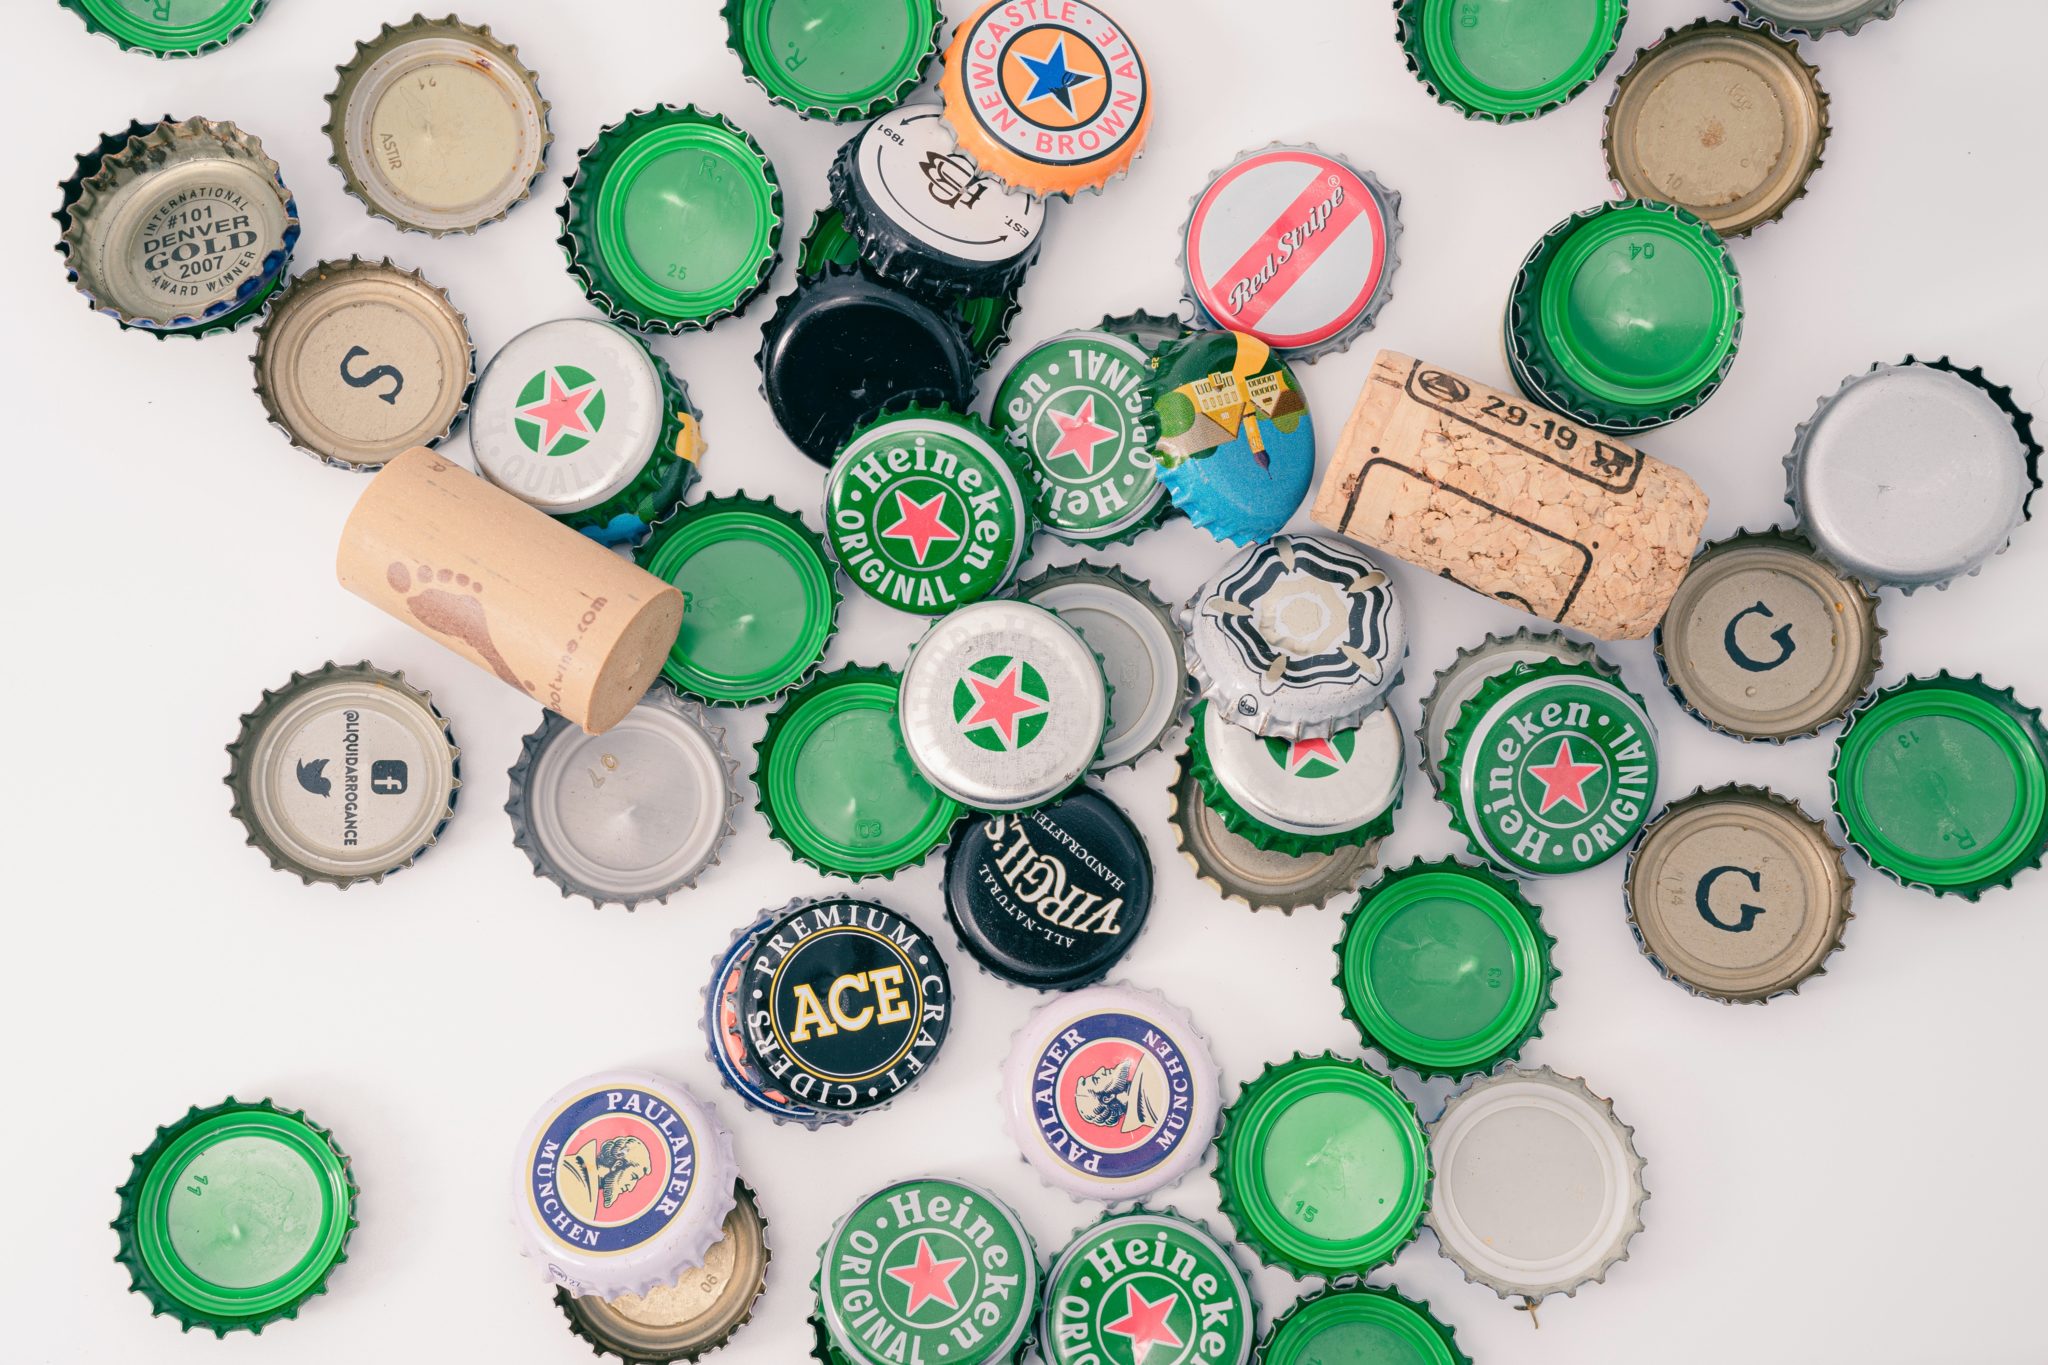 assorted beer bottle caps and wine corks on white background